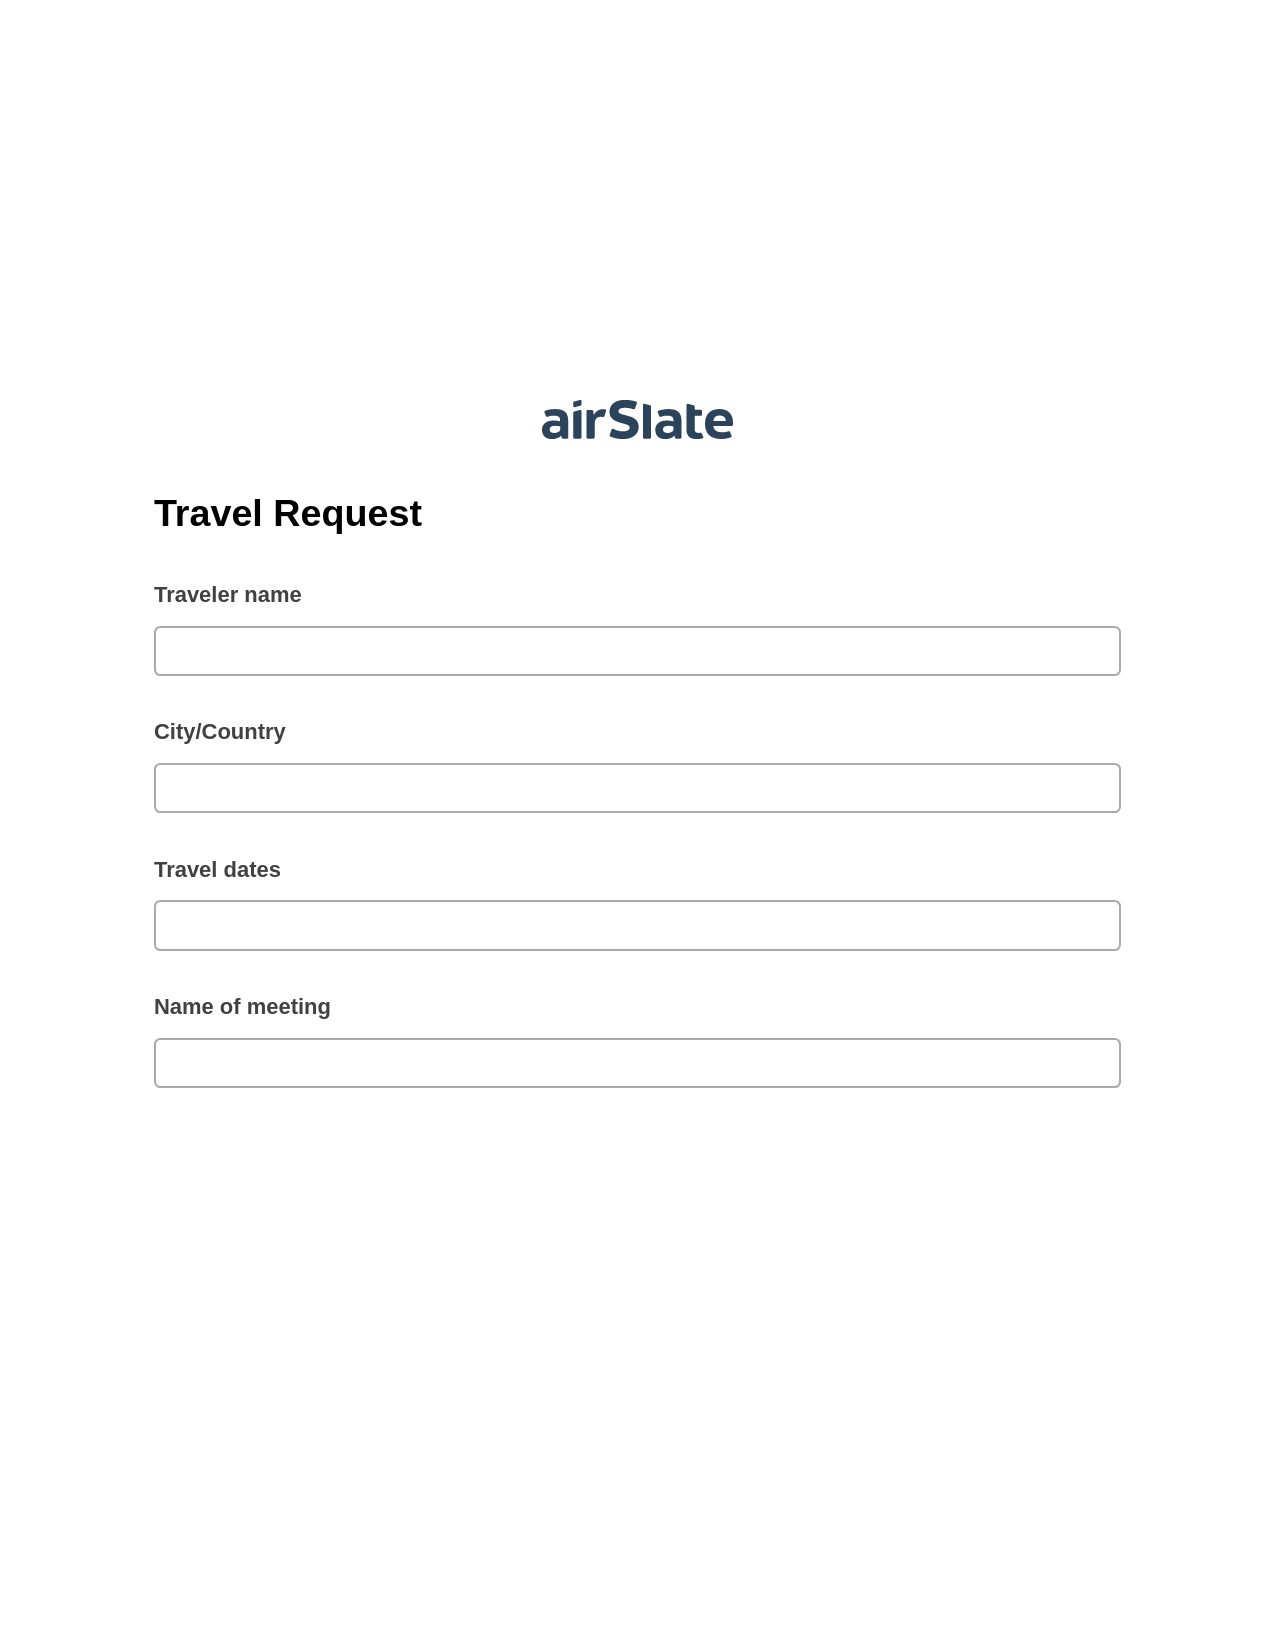 Travel Request Pre-fill from CSV File Bot, Unassign Role Bot, Email Notification Postfinish Bot